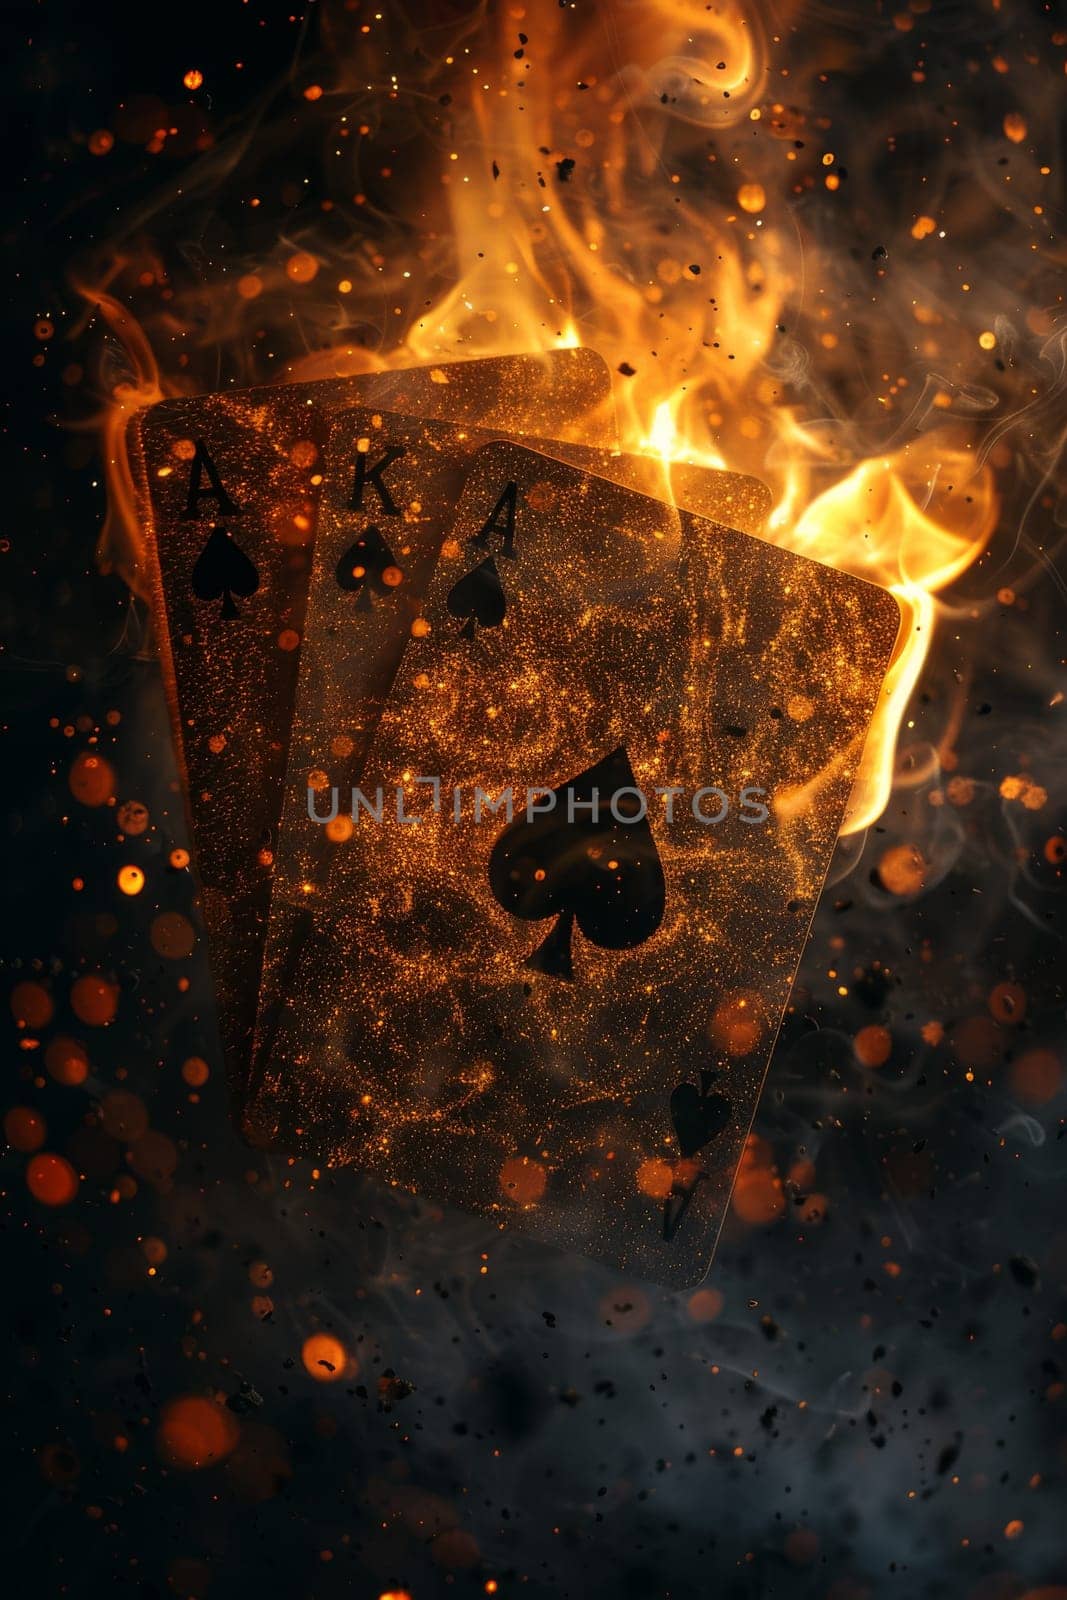 A card with a spade on it is lit on fire and surrounded by smoke. Concept of danger and excitement, as the fire and smoke create a dramatic and intense atmosphere. The card itself is a symbol of luck